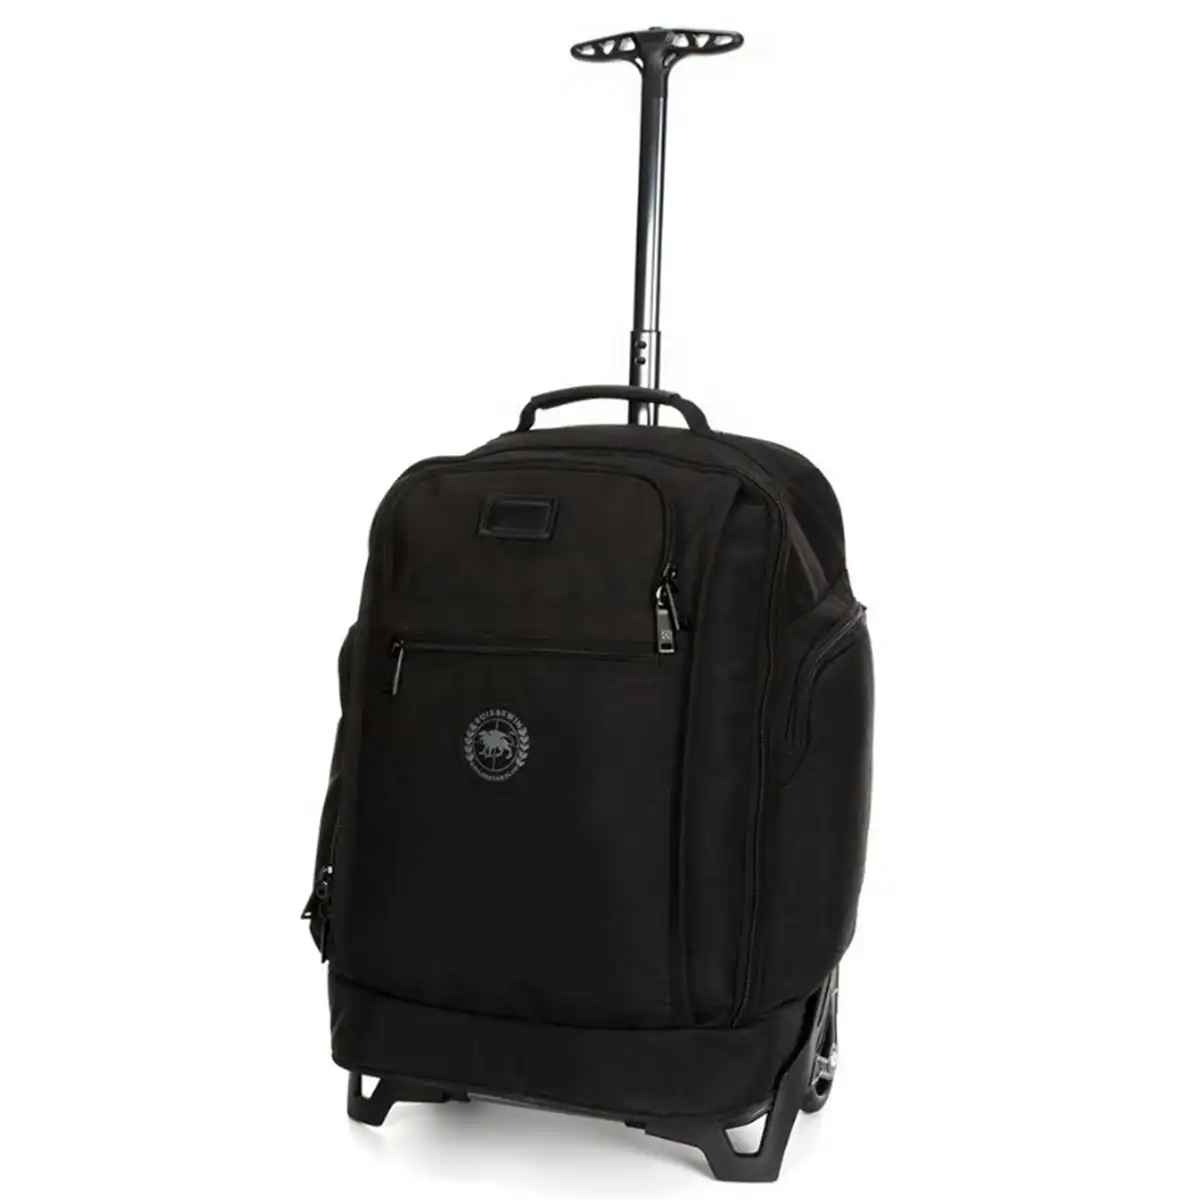 Suissewin Swiss Wheeled Bag Lightweight Big Wheels Carry On Travel Suitcase Rolling Tote SN19350 Black